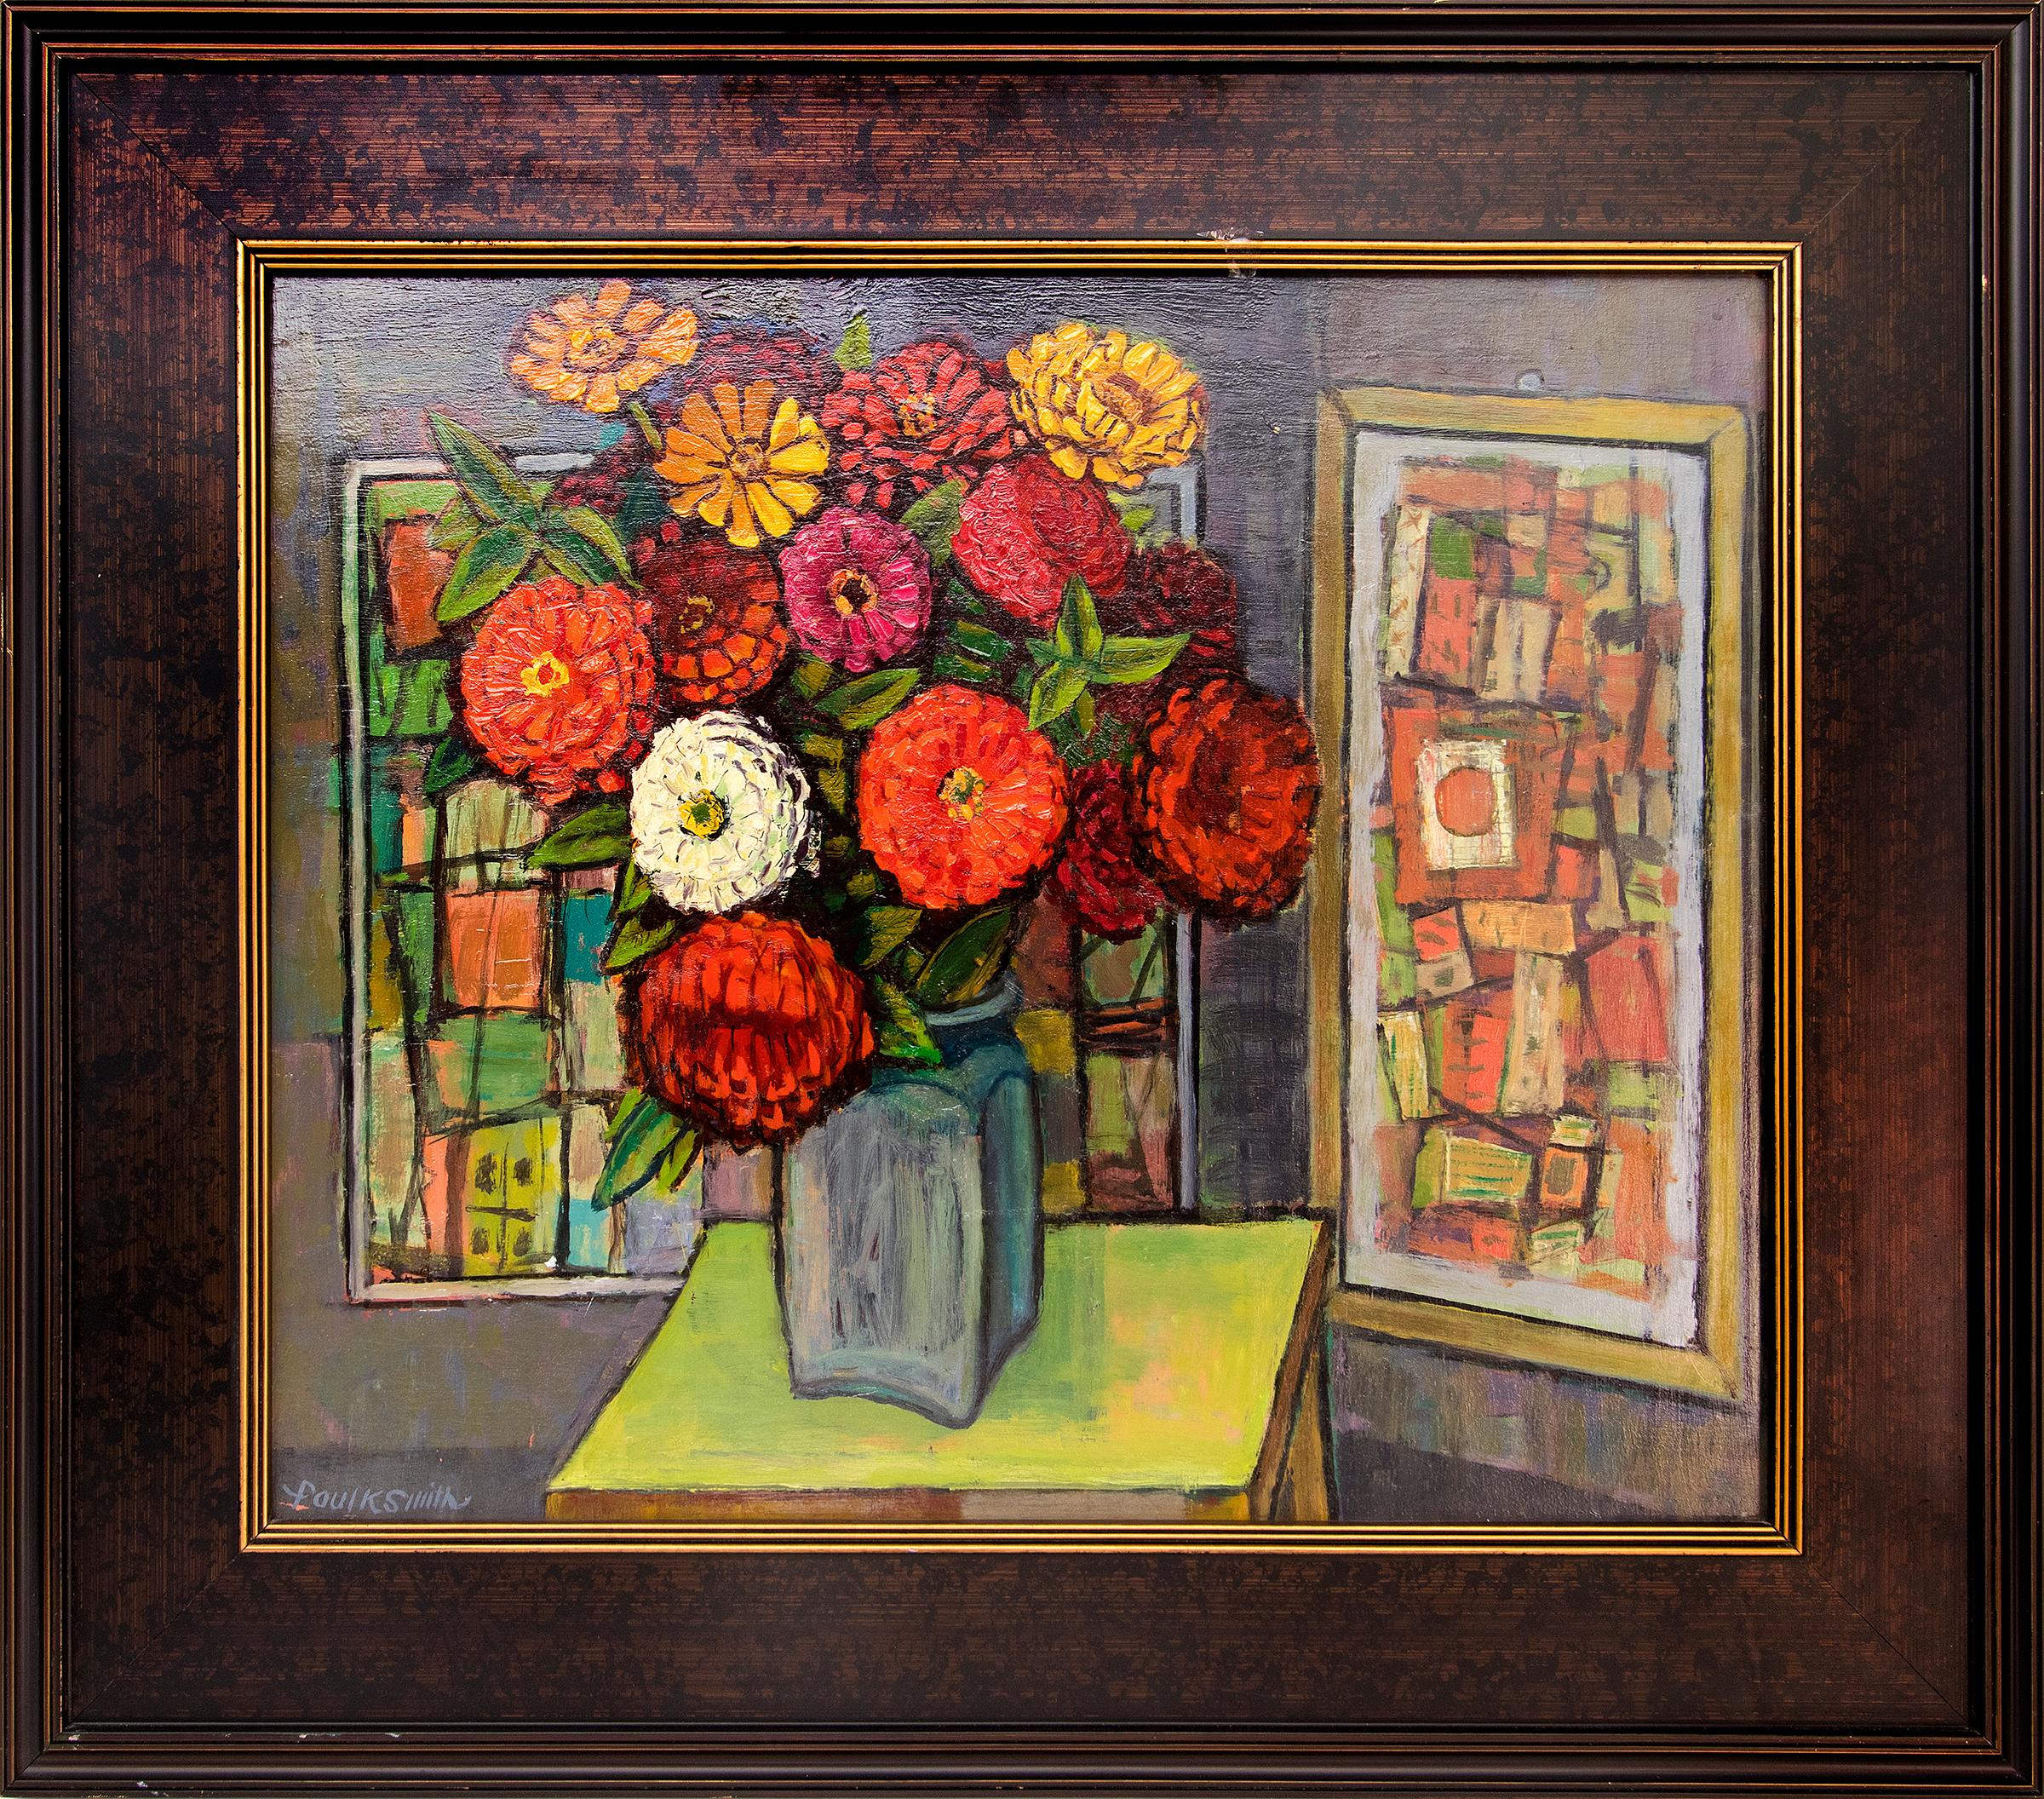 Paul K Smith Abstract Painting - American Modernist Abstract Still Life Painting with Zinnia Flowers, Red Orange